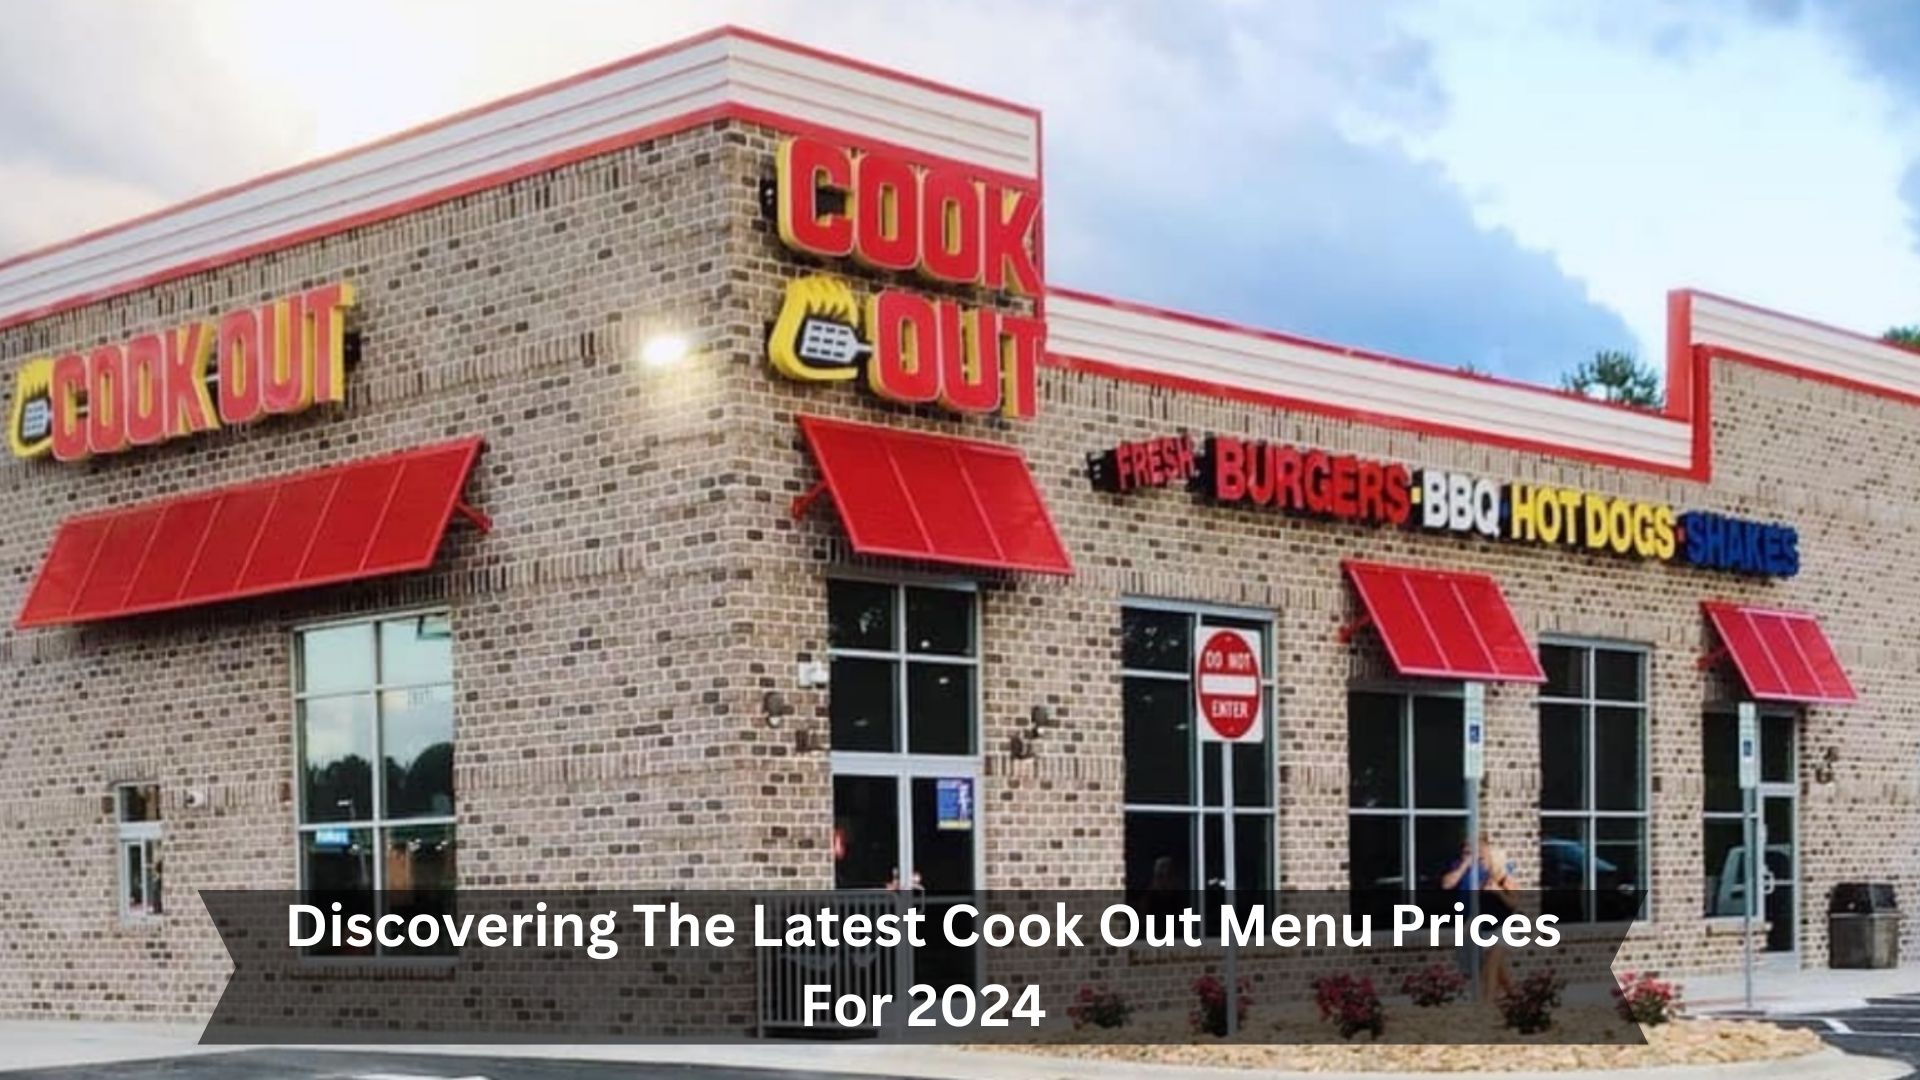 Discovering-The-Latest-Cook-Out-Menu-Prices-For-2024